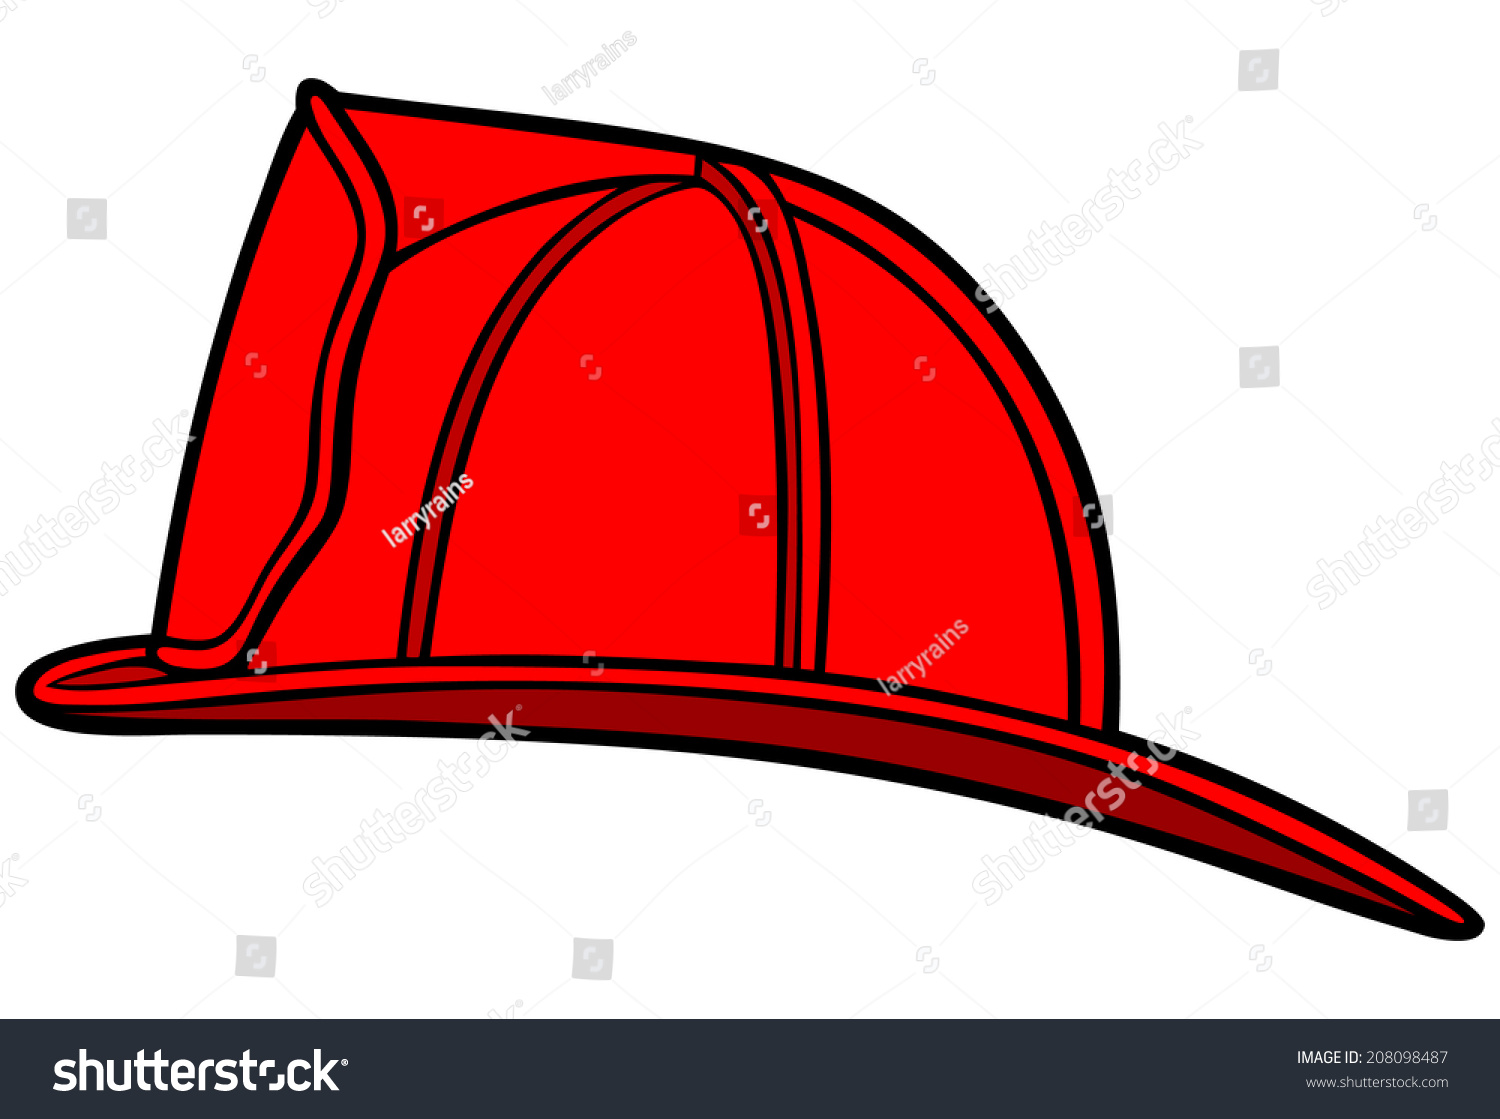 firefighter hat clipart - photo #40